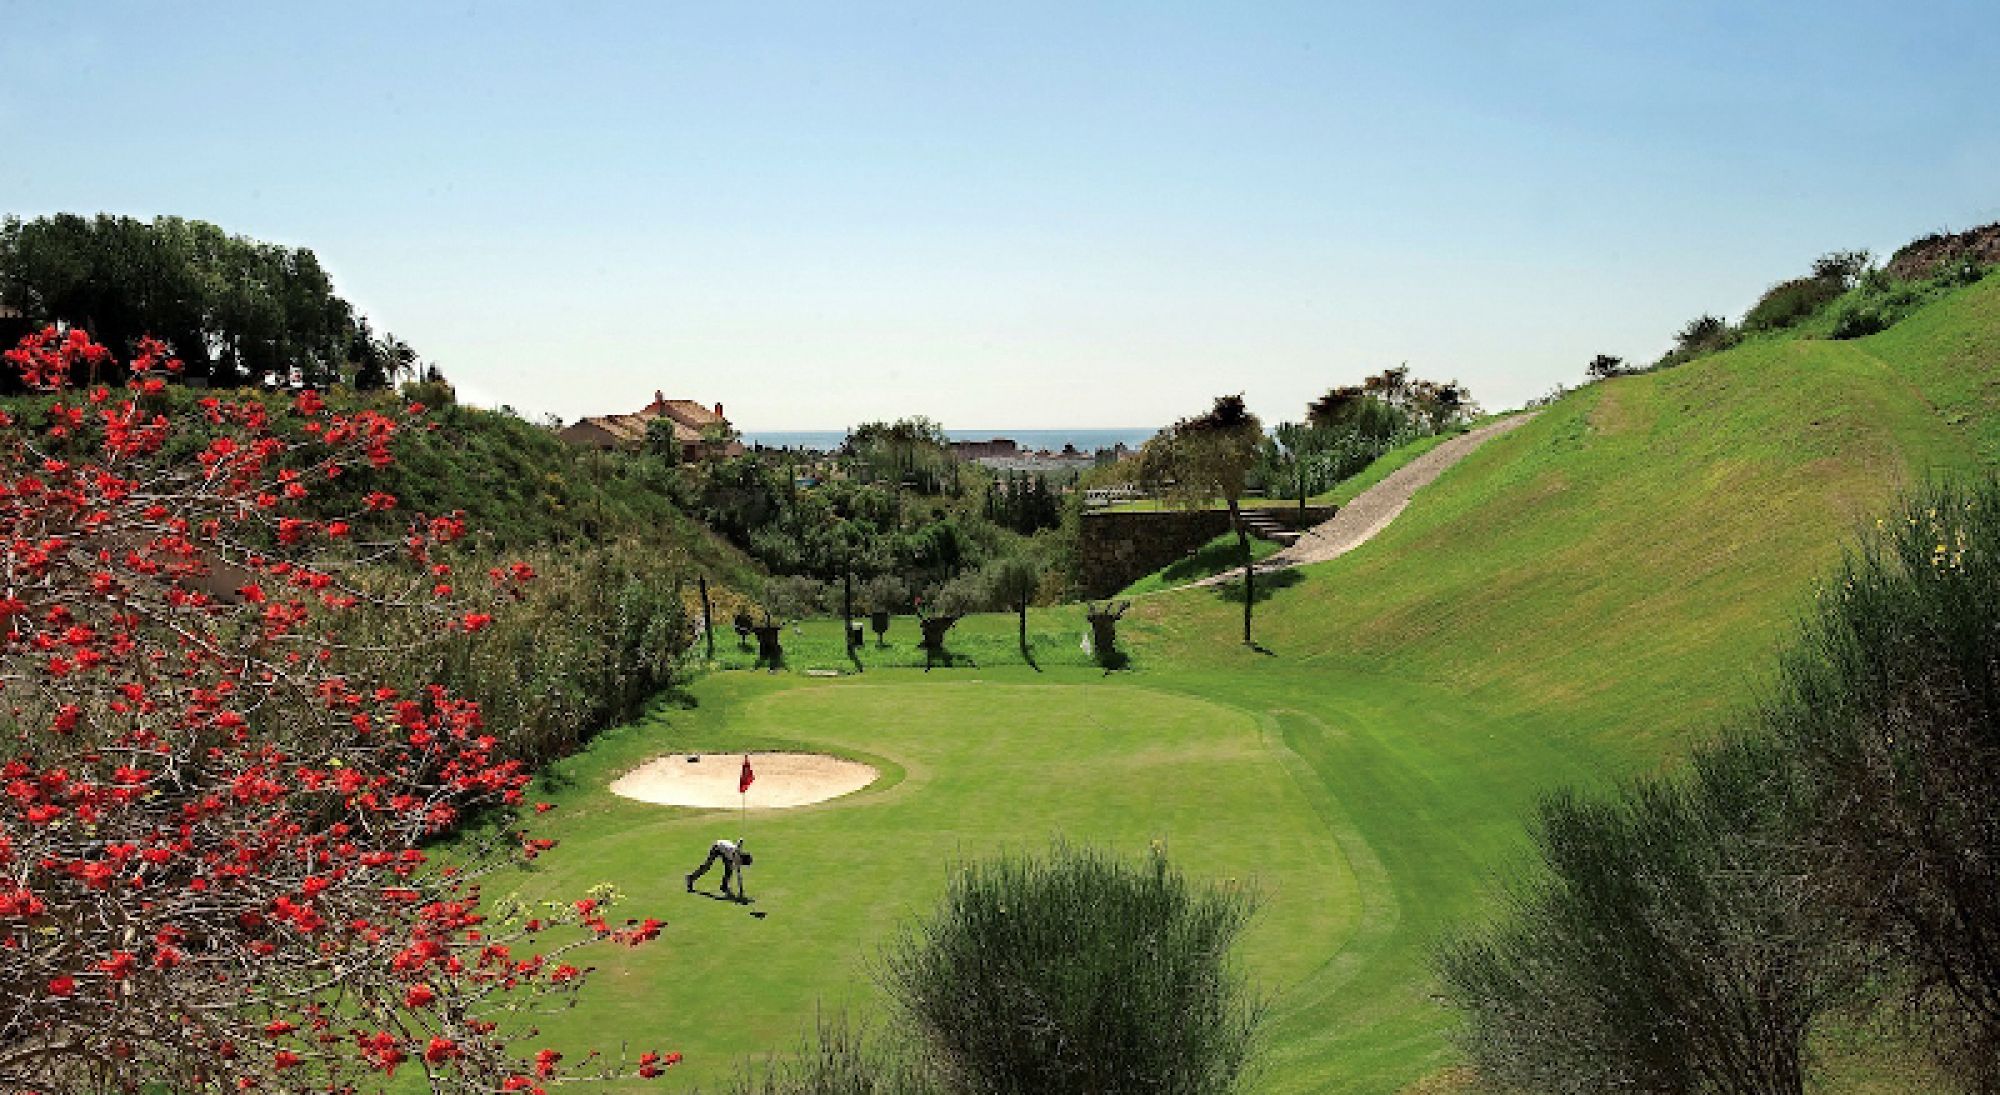 View Tramores Course - Villa Padierna's lovely golf course within dramatic Costa Del Sol.